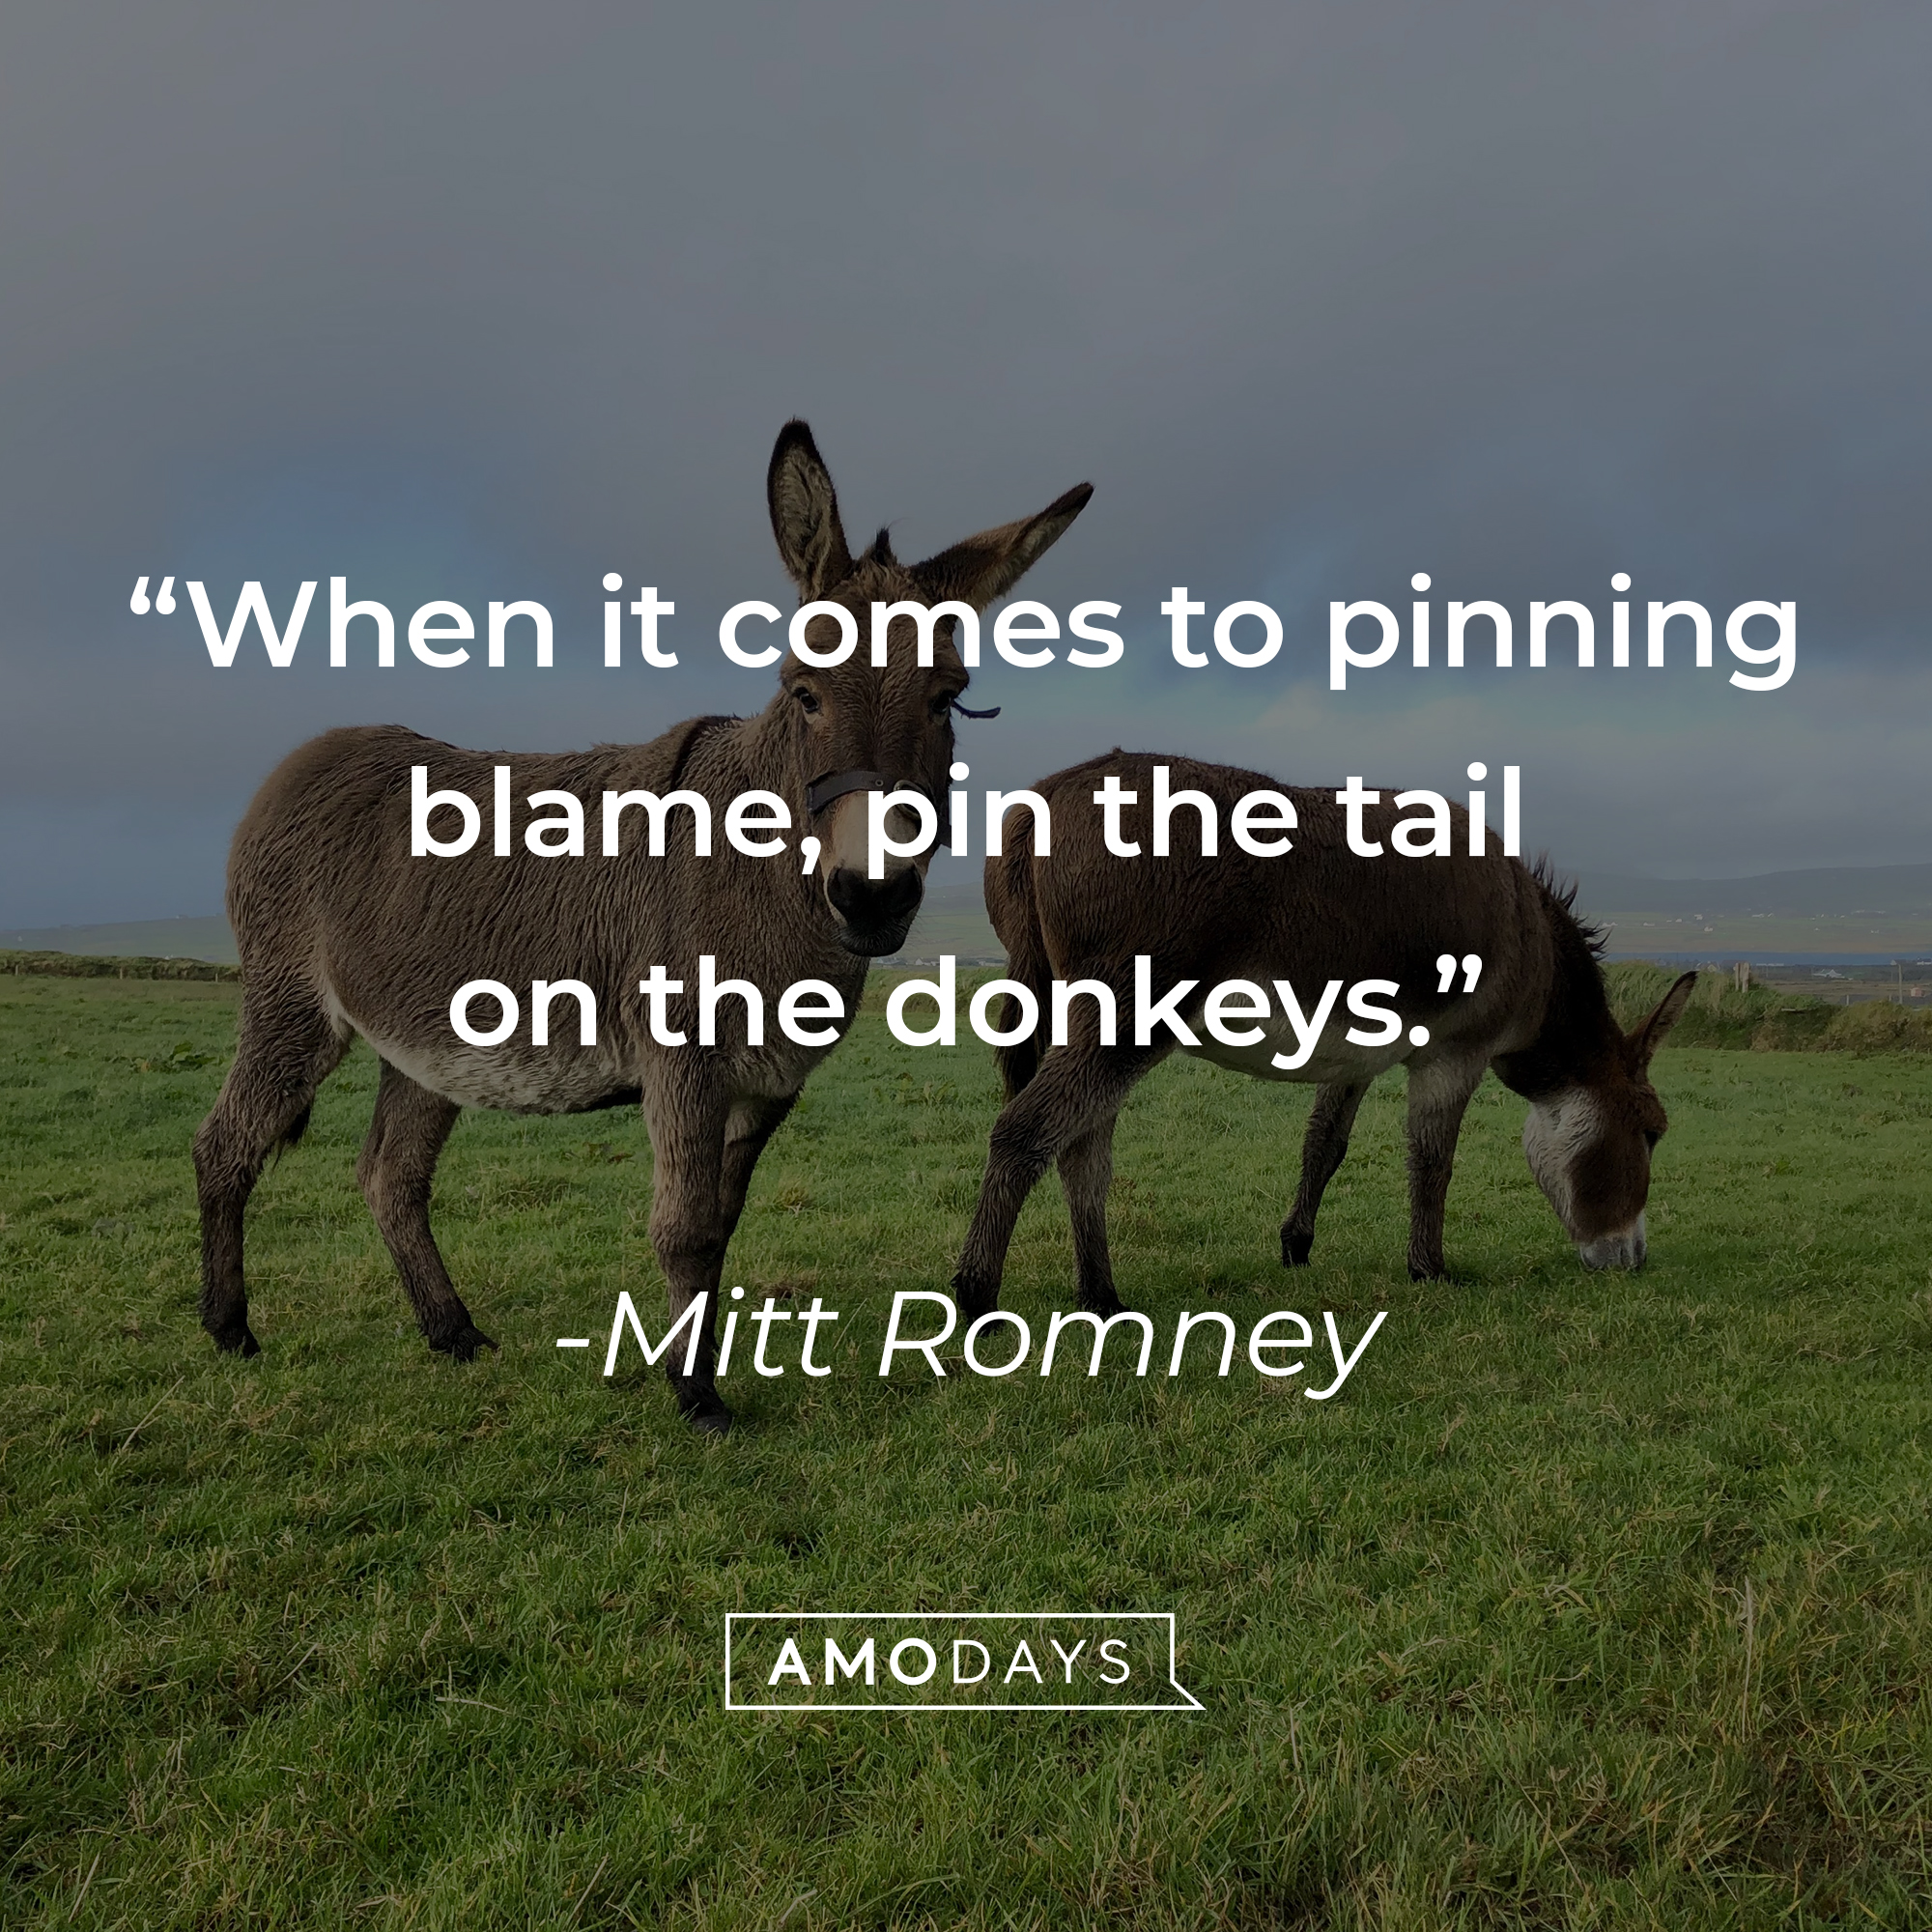 Mittt Romney's quote: "When it comes to pinning blame, pin the tail on the donkeys." | Source: Unsplash